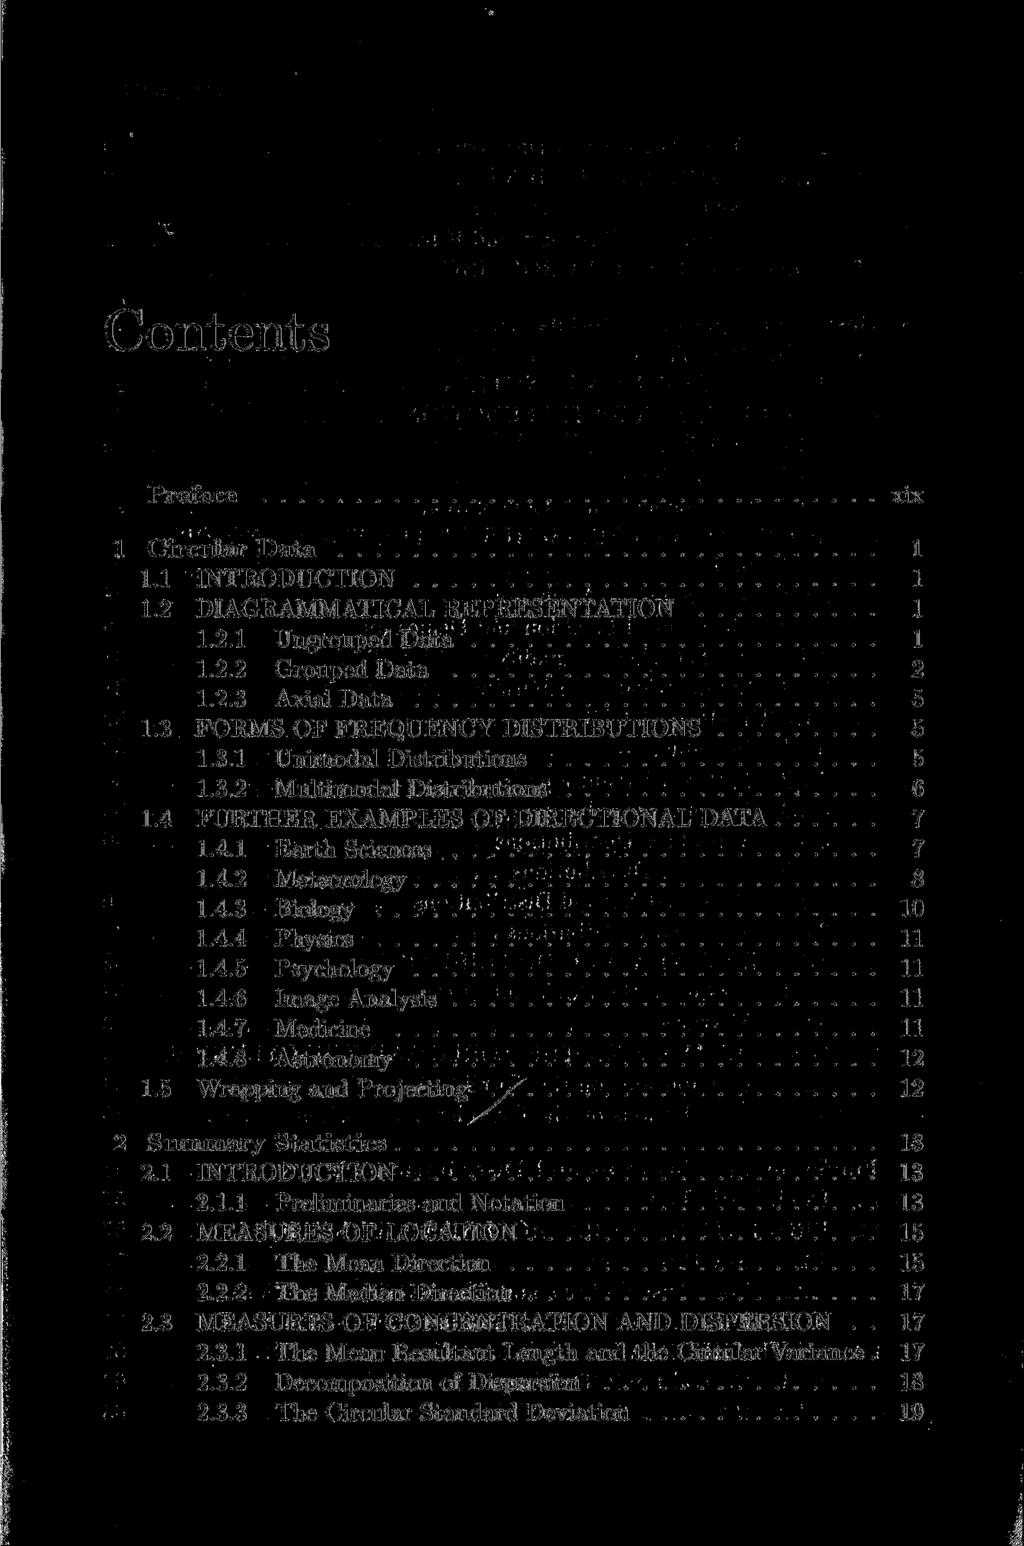 Contents Preface xix 1 Circular Data 1 1.1 INTRODUCTION 1 1.2 DIAGRAMMATICAL REPRESENTATION 1 1.2.1 Ungrouped Data 1 1.2.2 Grouped Data 2 1.2.3 Axial Data 5 1.3 FORMS OF FREQUENCY DISTRIBUTIONS 5 1.3.1 Unimodal Distributions 5 1.